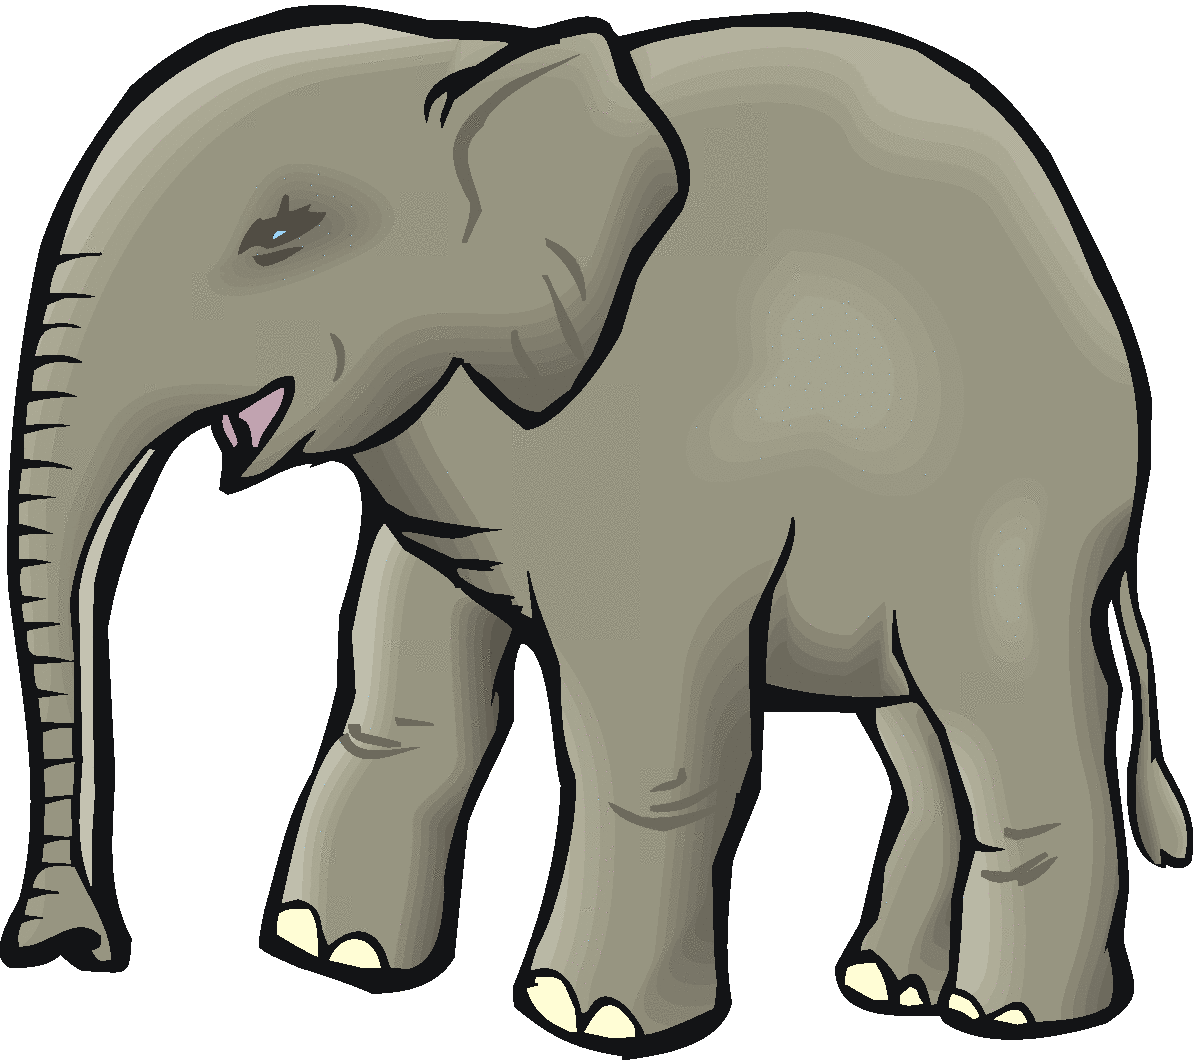 Circus elephant clipart free clip art images